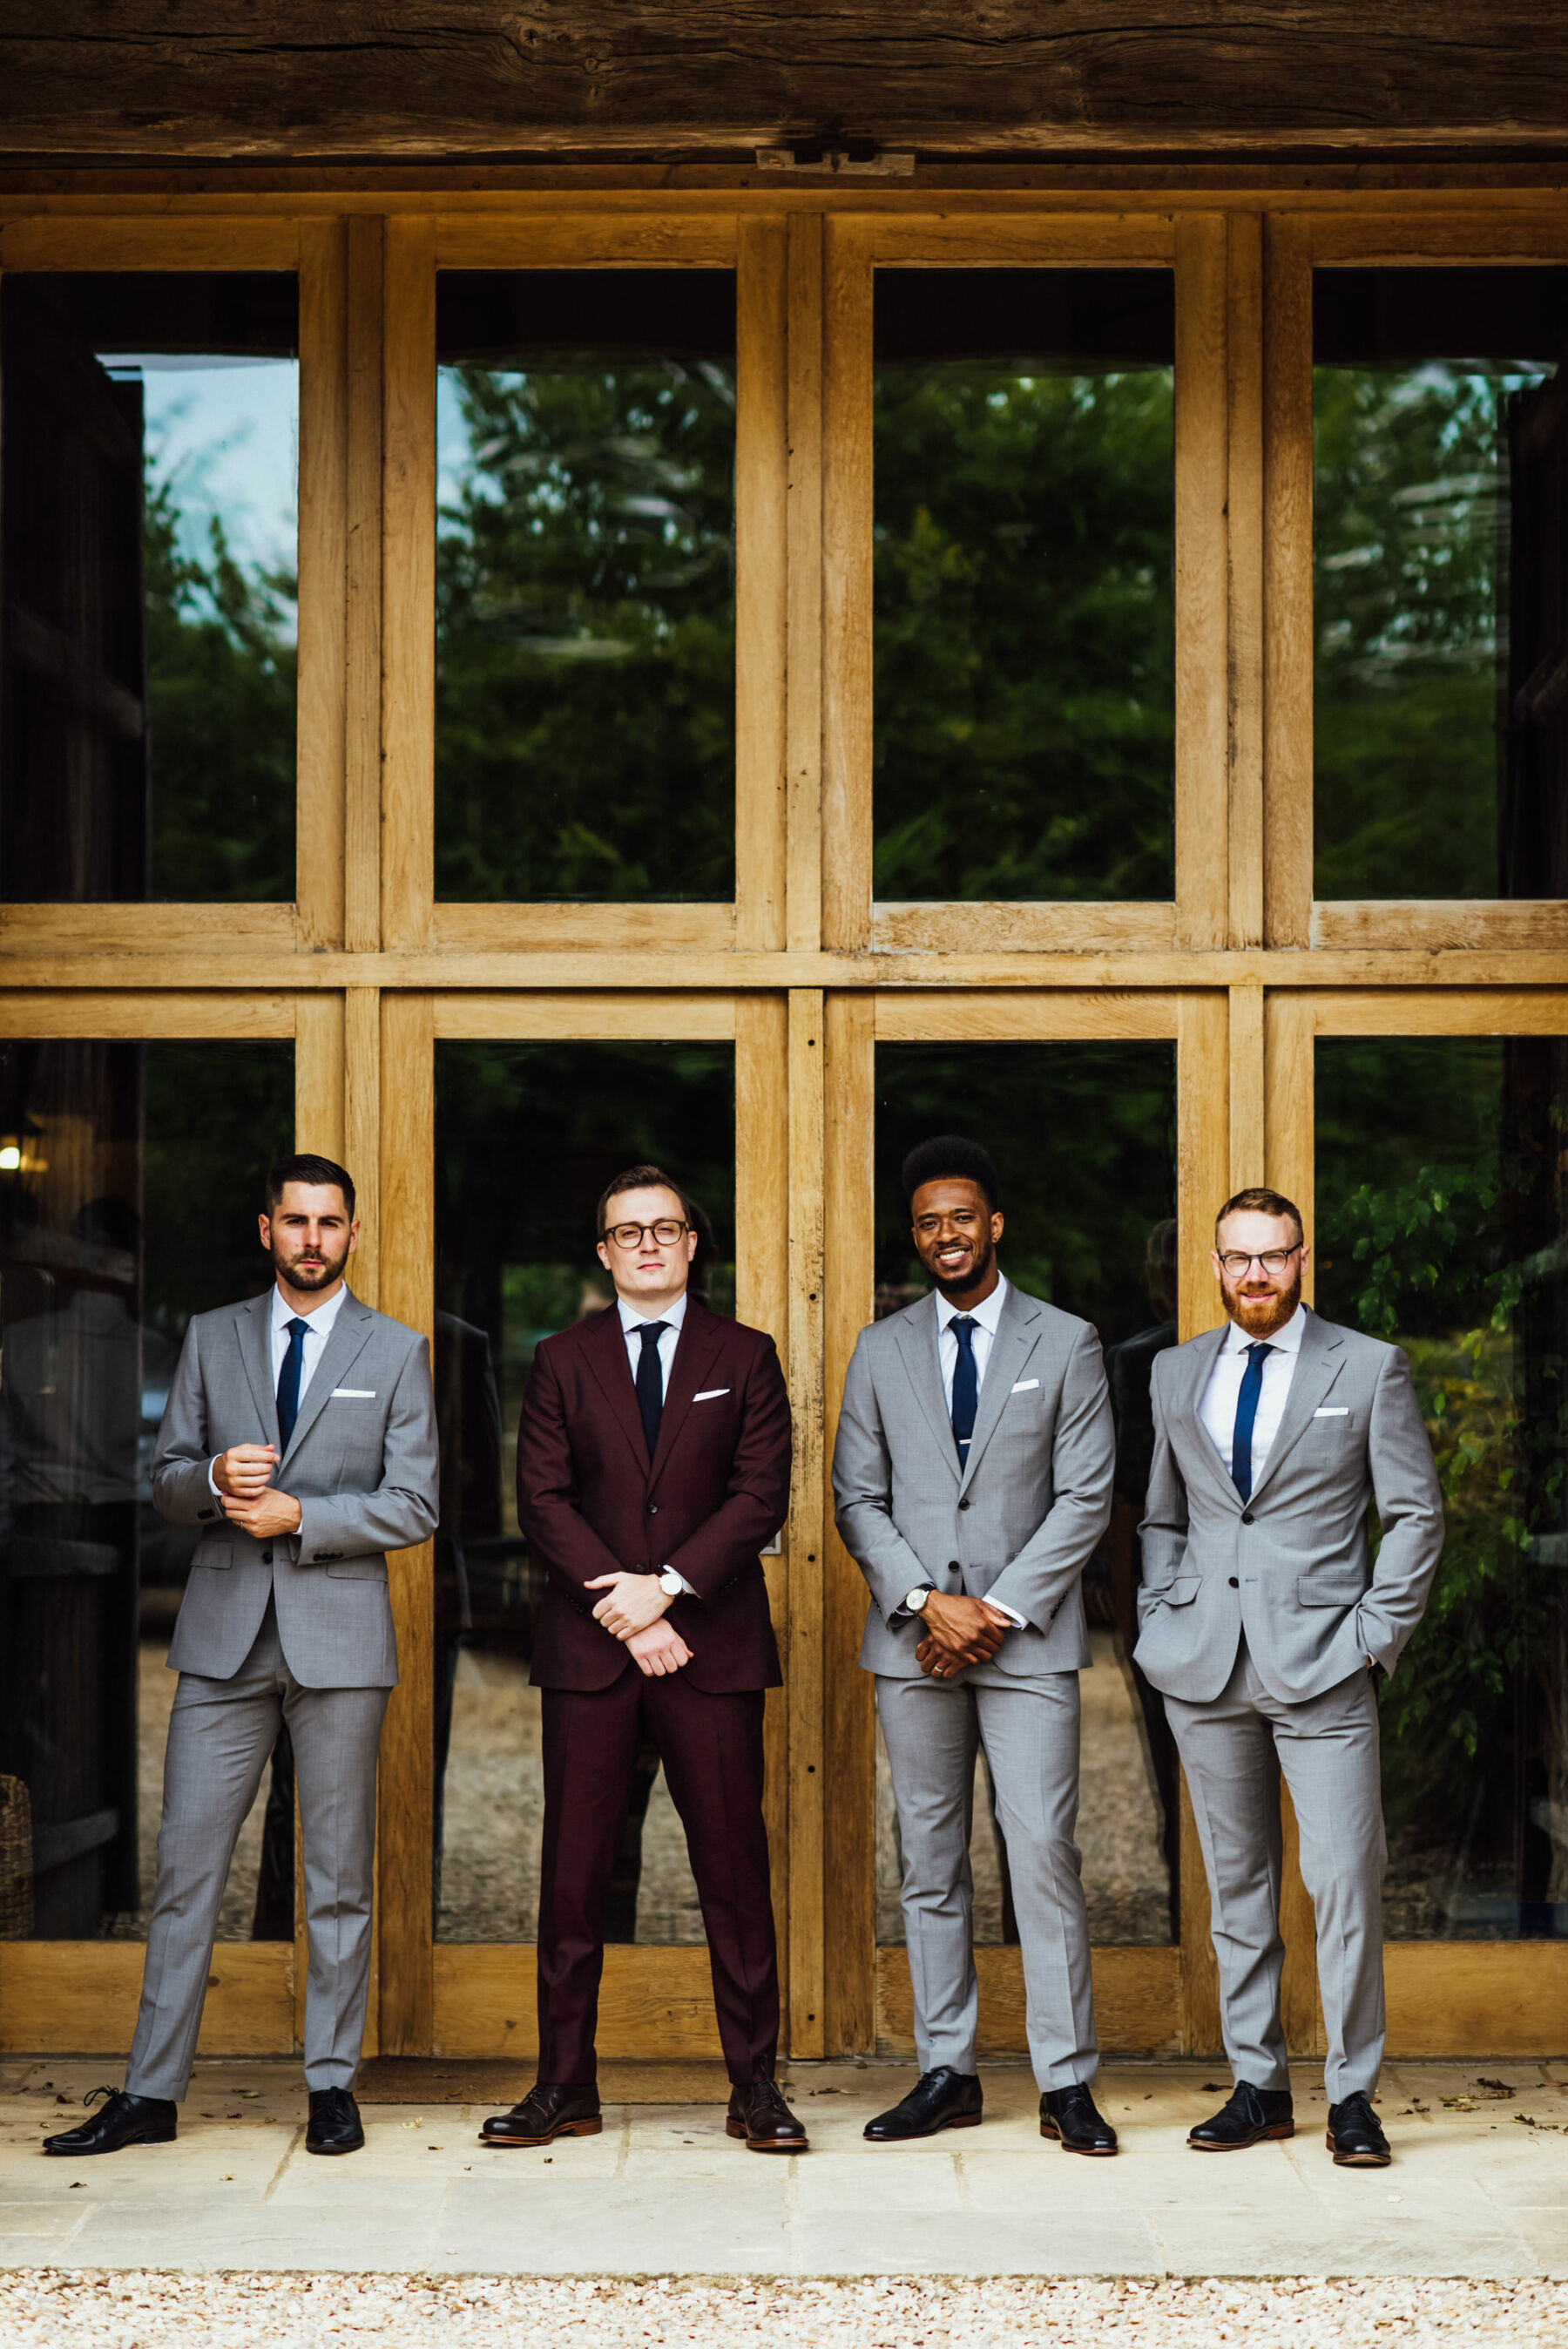 Groom in burgundy suit from Suit Supply.